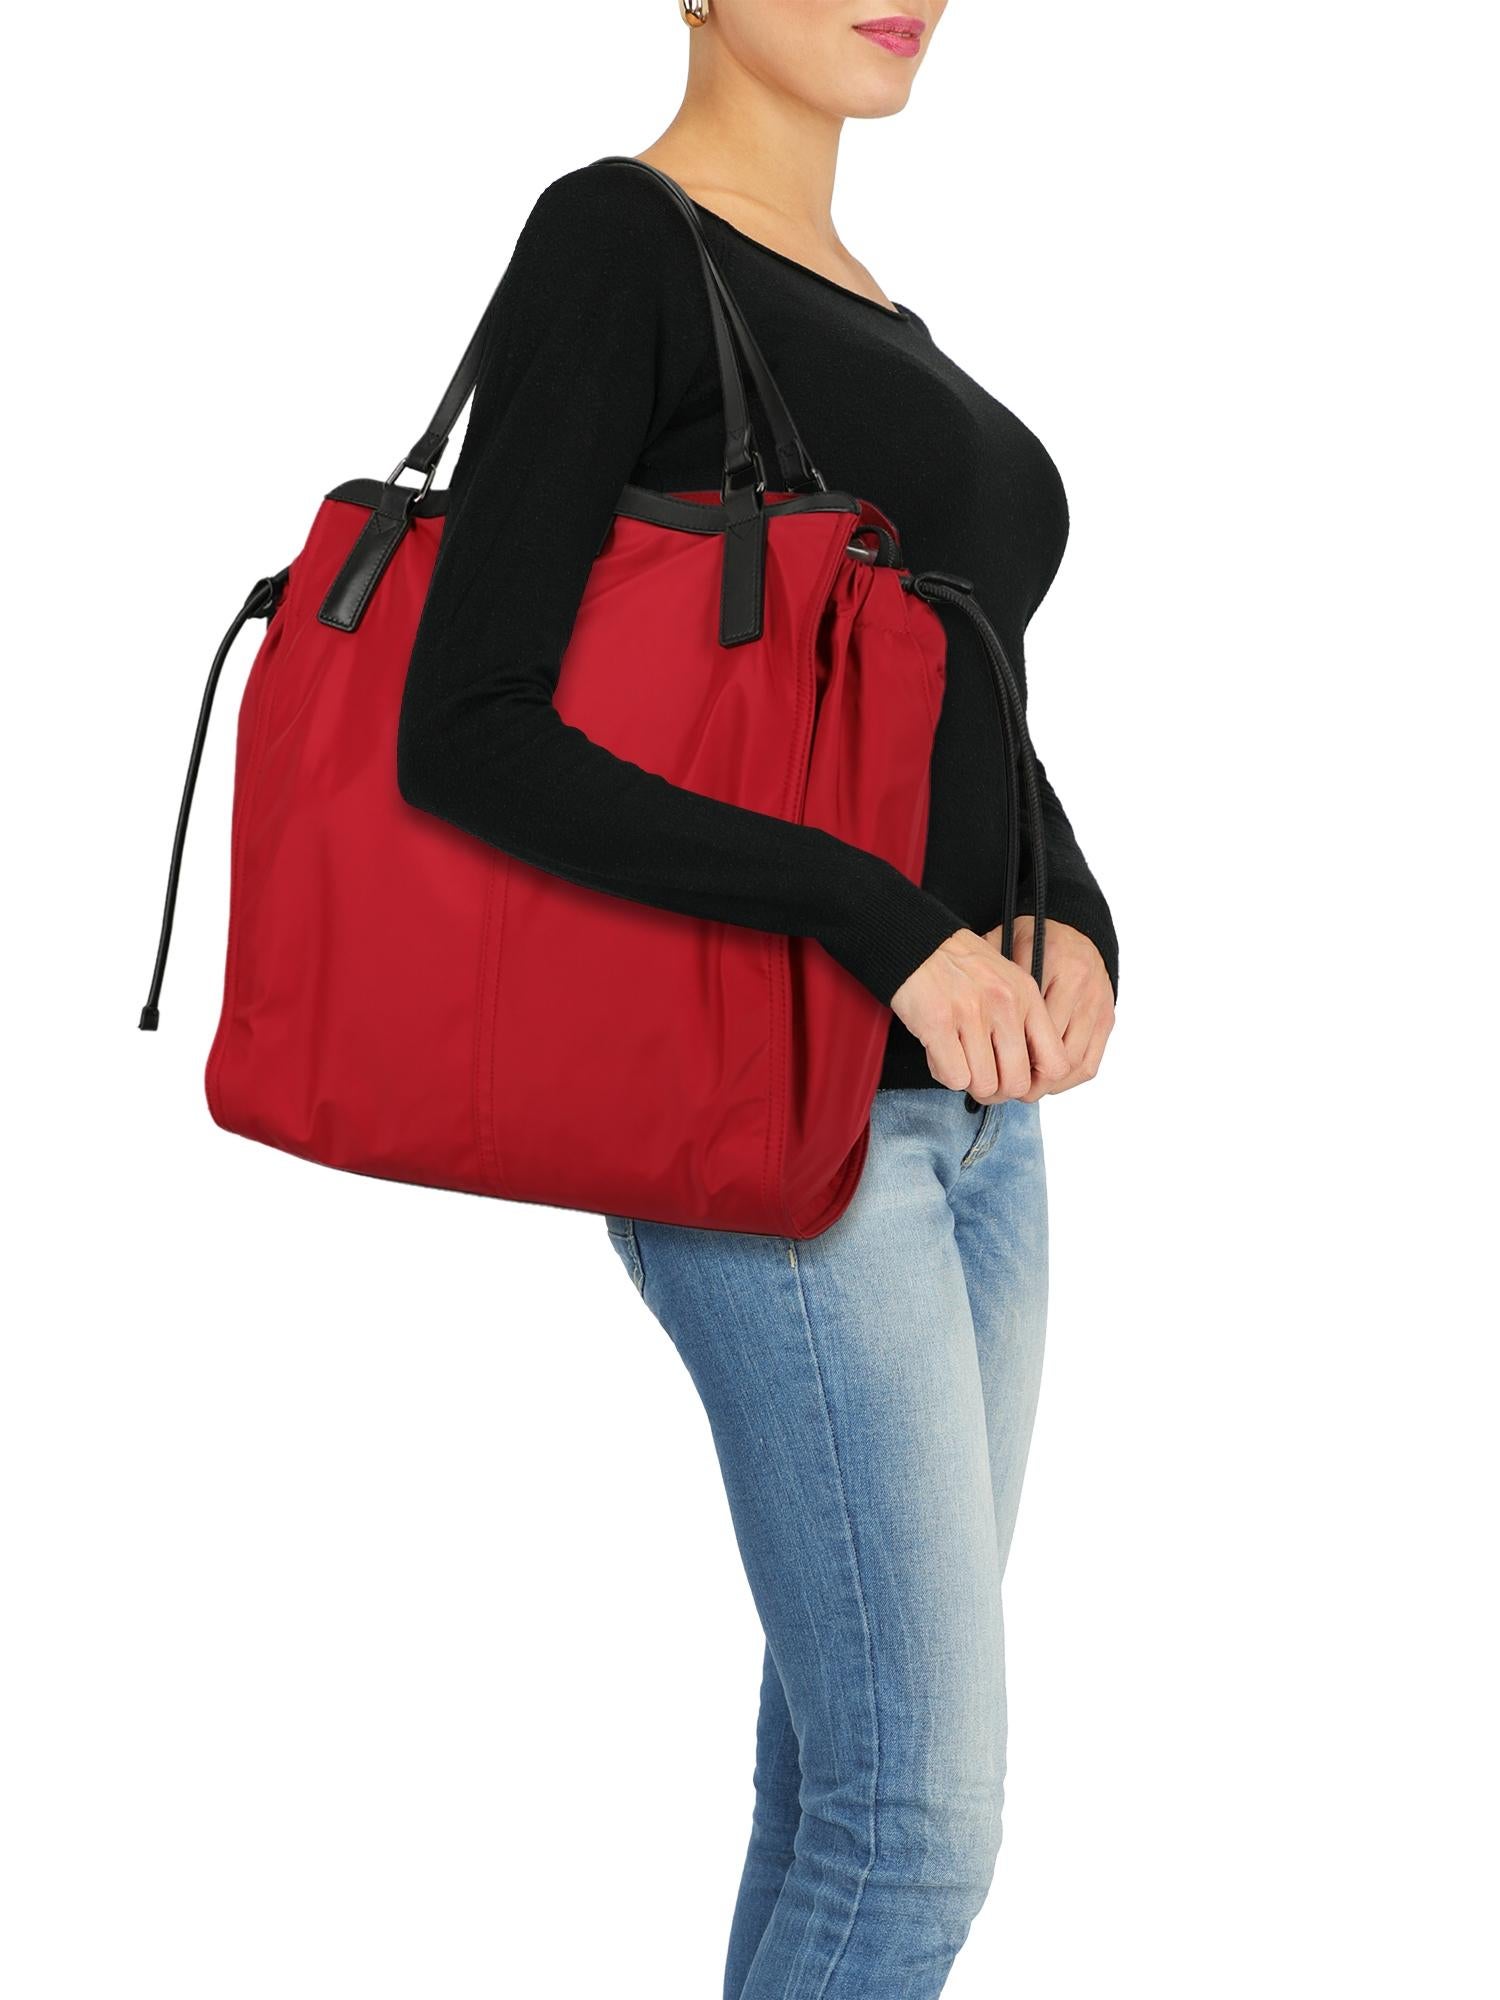 Bag, synthetic fibers, solid color, front logo, zipper fastening, ruthenium hardware, internal pocket, day bag.

Includes:
- Product care

Product Condition: Very Good
Odor: slightly noticeable smell. Lining: visible stains. Corners and edges: